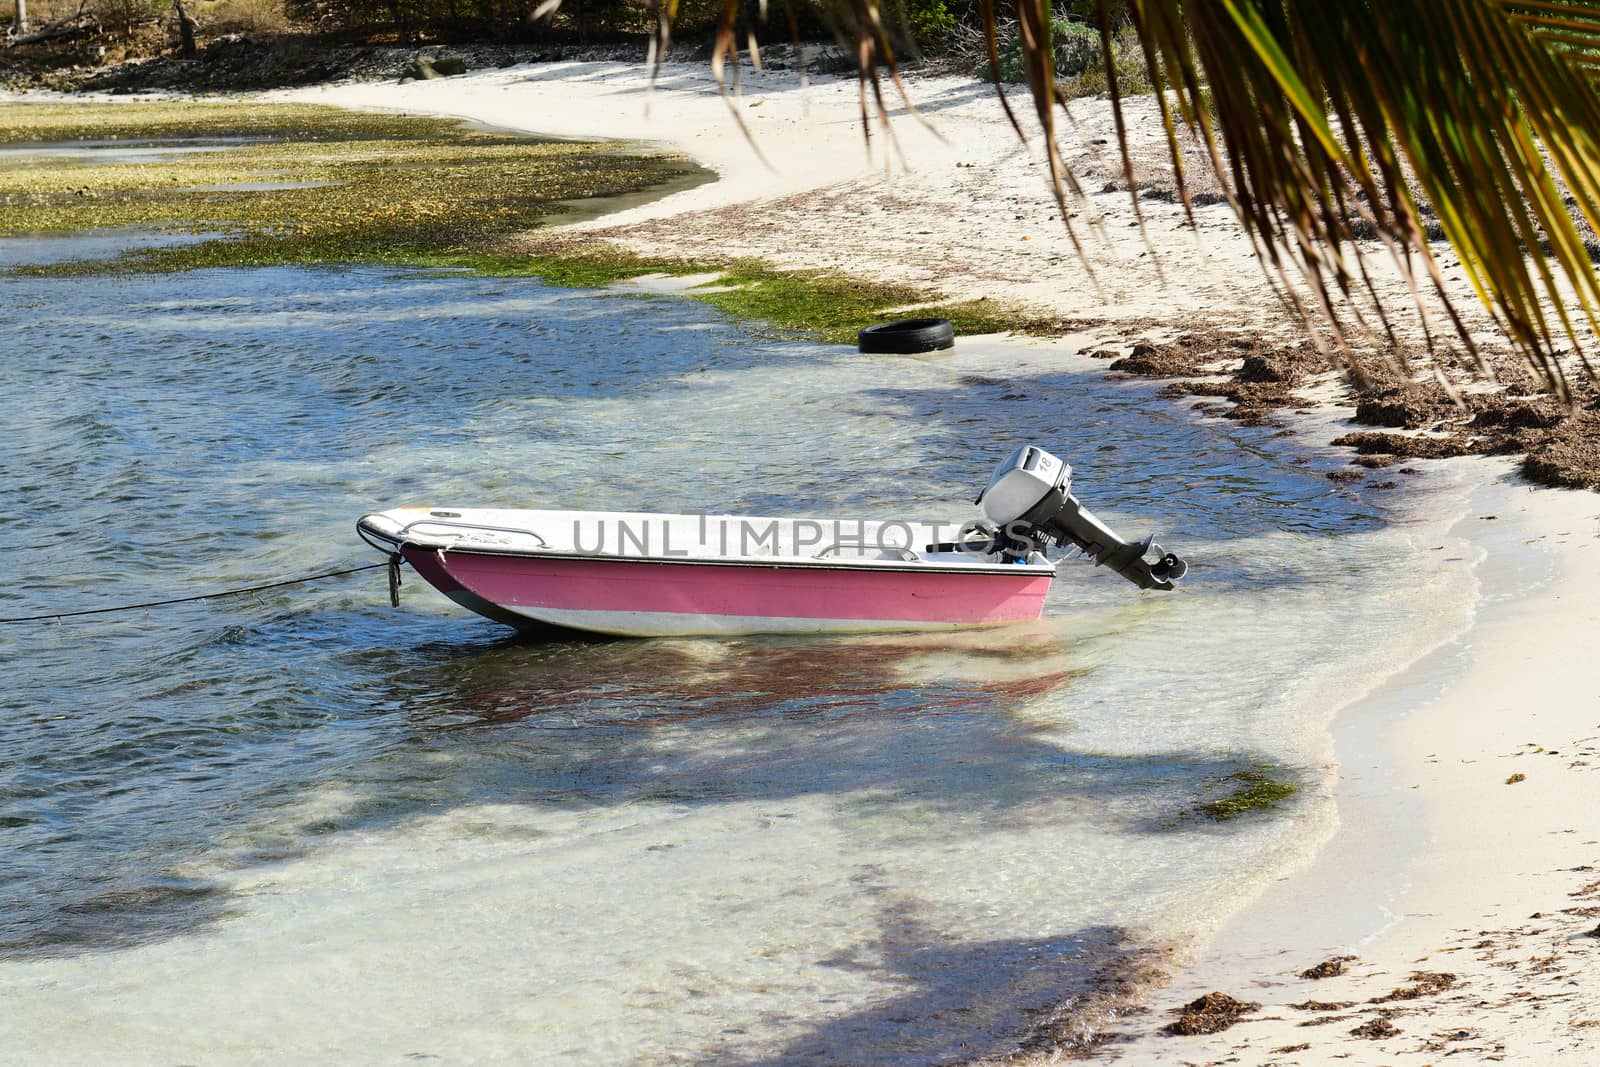 Dinghy with outboard moored in shallow water on British Virgin Islands beach